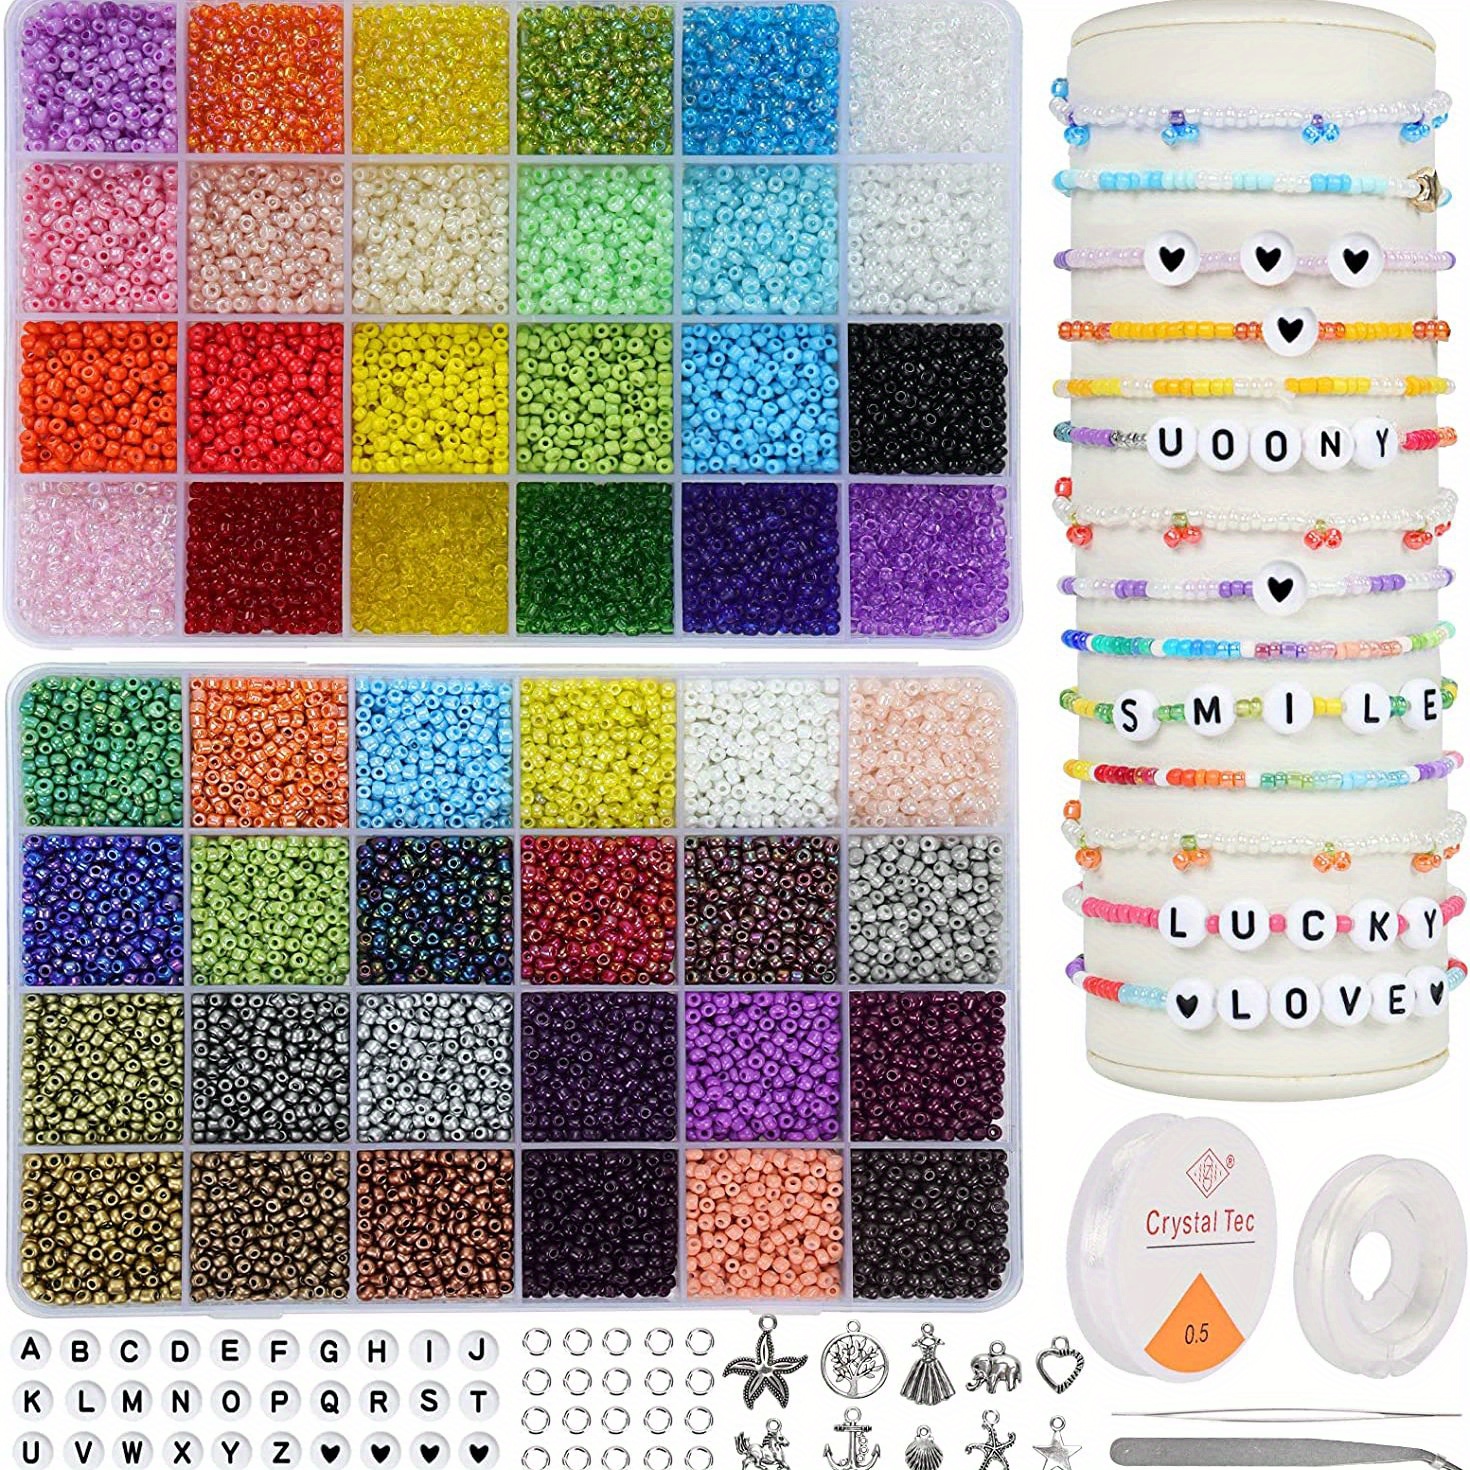 UOONY 35000pcs 2mm Glass Seed Beads for Jewelry Making Kit, 250pcs Alphabet  Letter Beads, Tiny Beads Set for Bracelets Making, DIY, Art and Craft with  Rolls of Elastic String Cord, Charms and